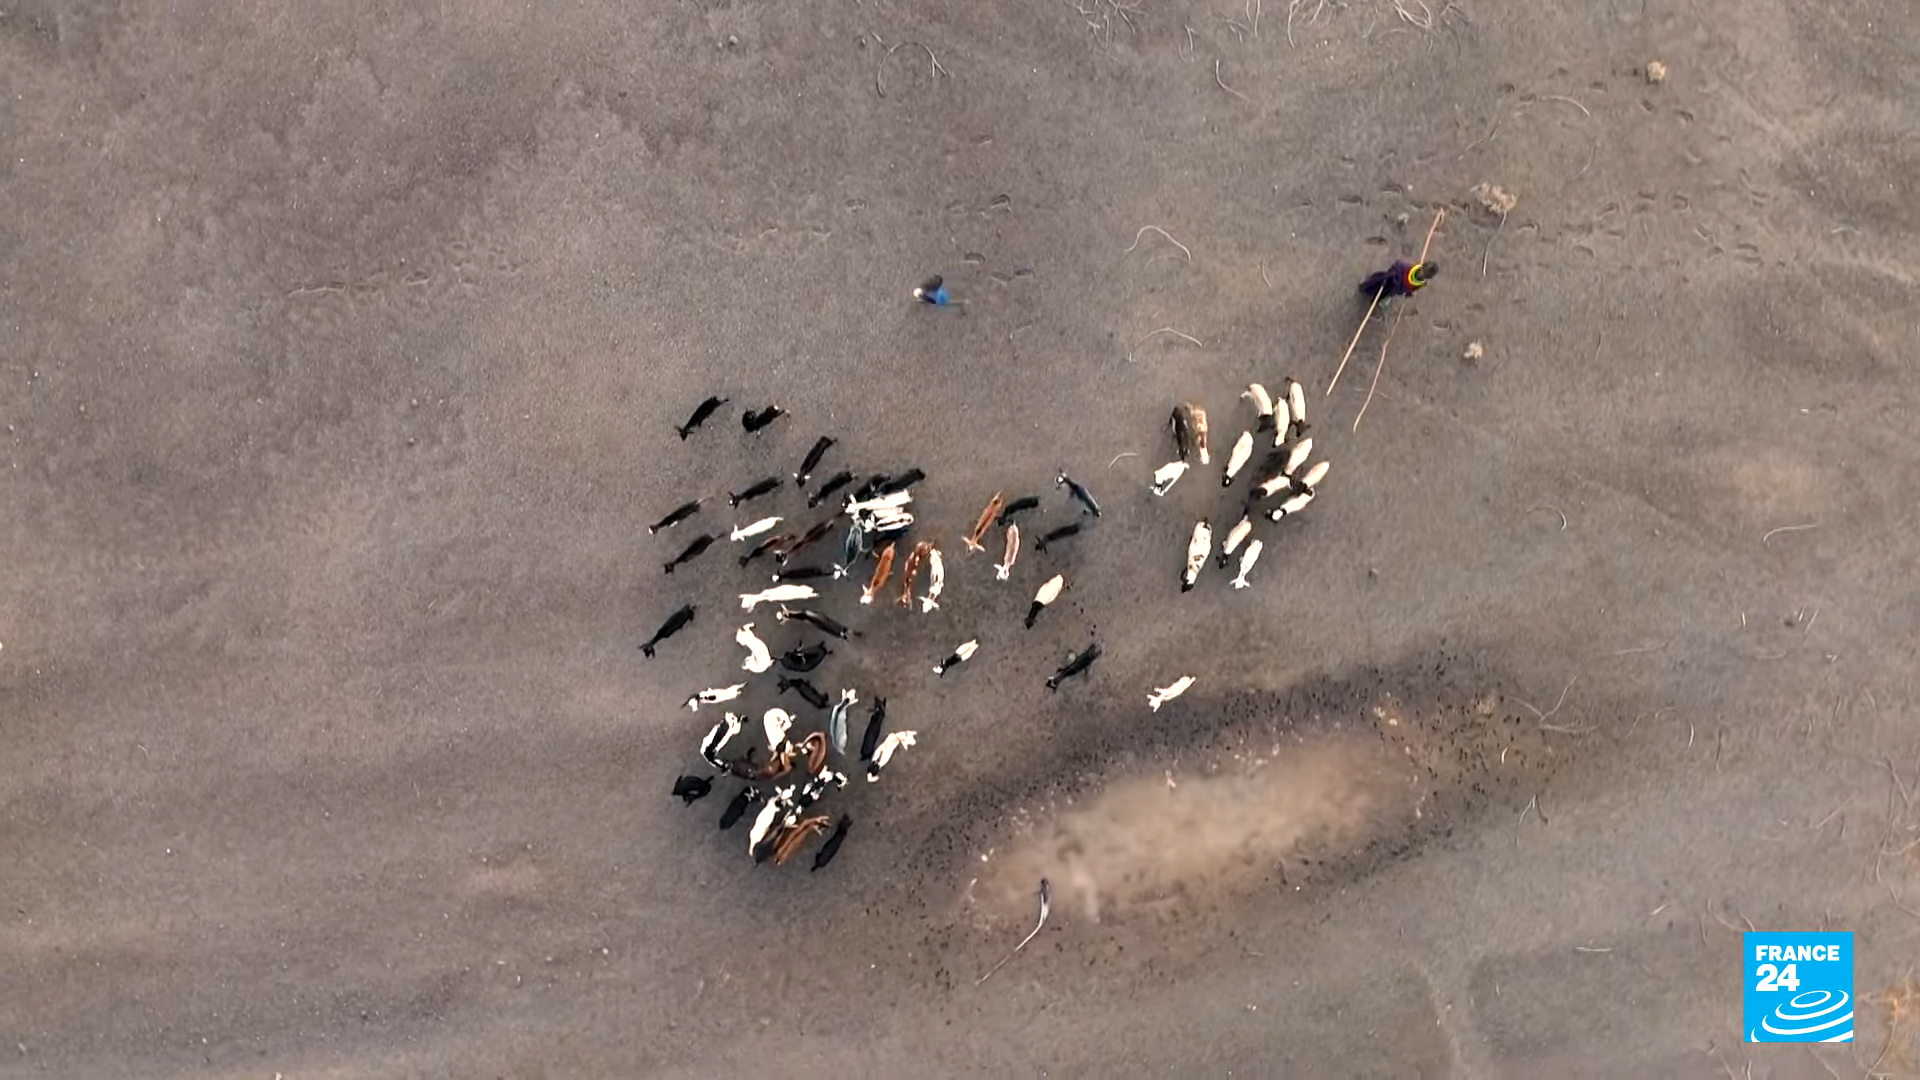 Aerial view of the Turkana people, nomadic herders in Kenya, near a dried-up watering hole. They were suffering amid a five-year drought in March 2023. Photo: FRANCE 24